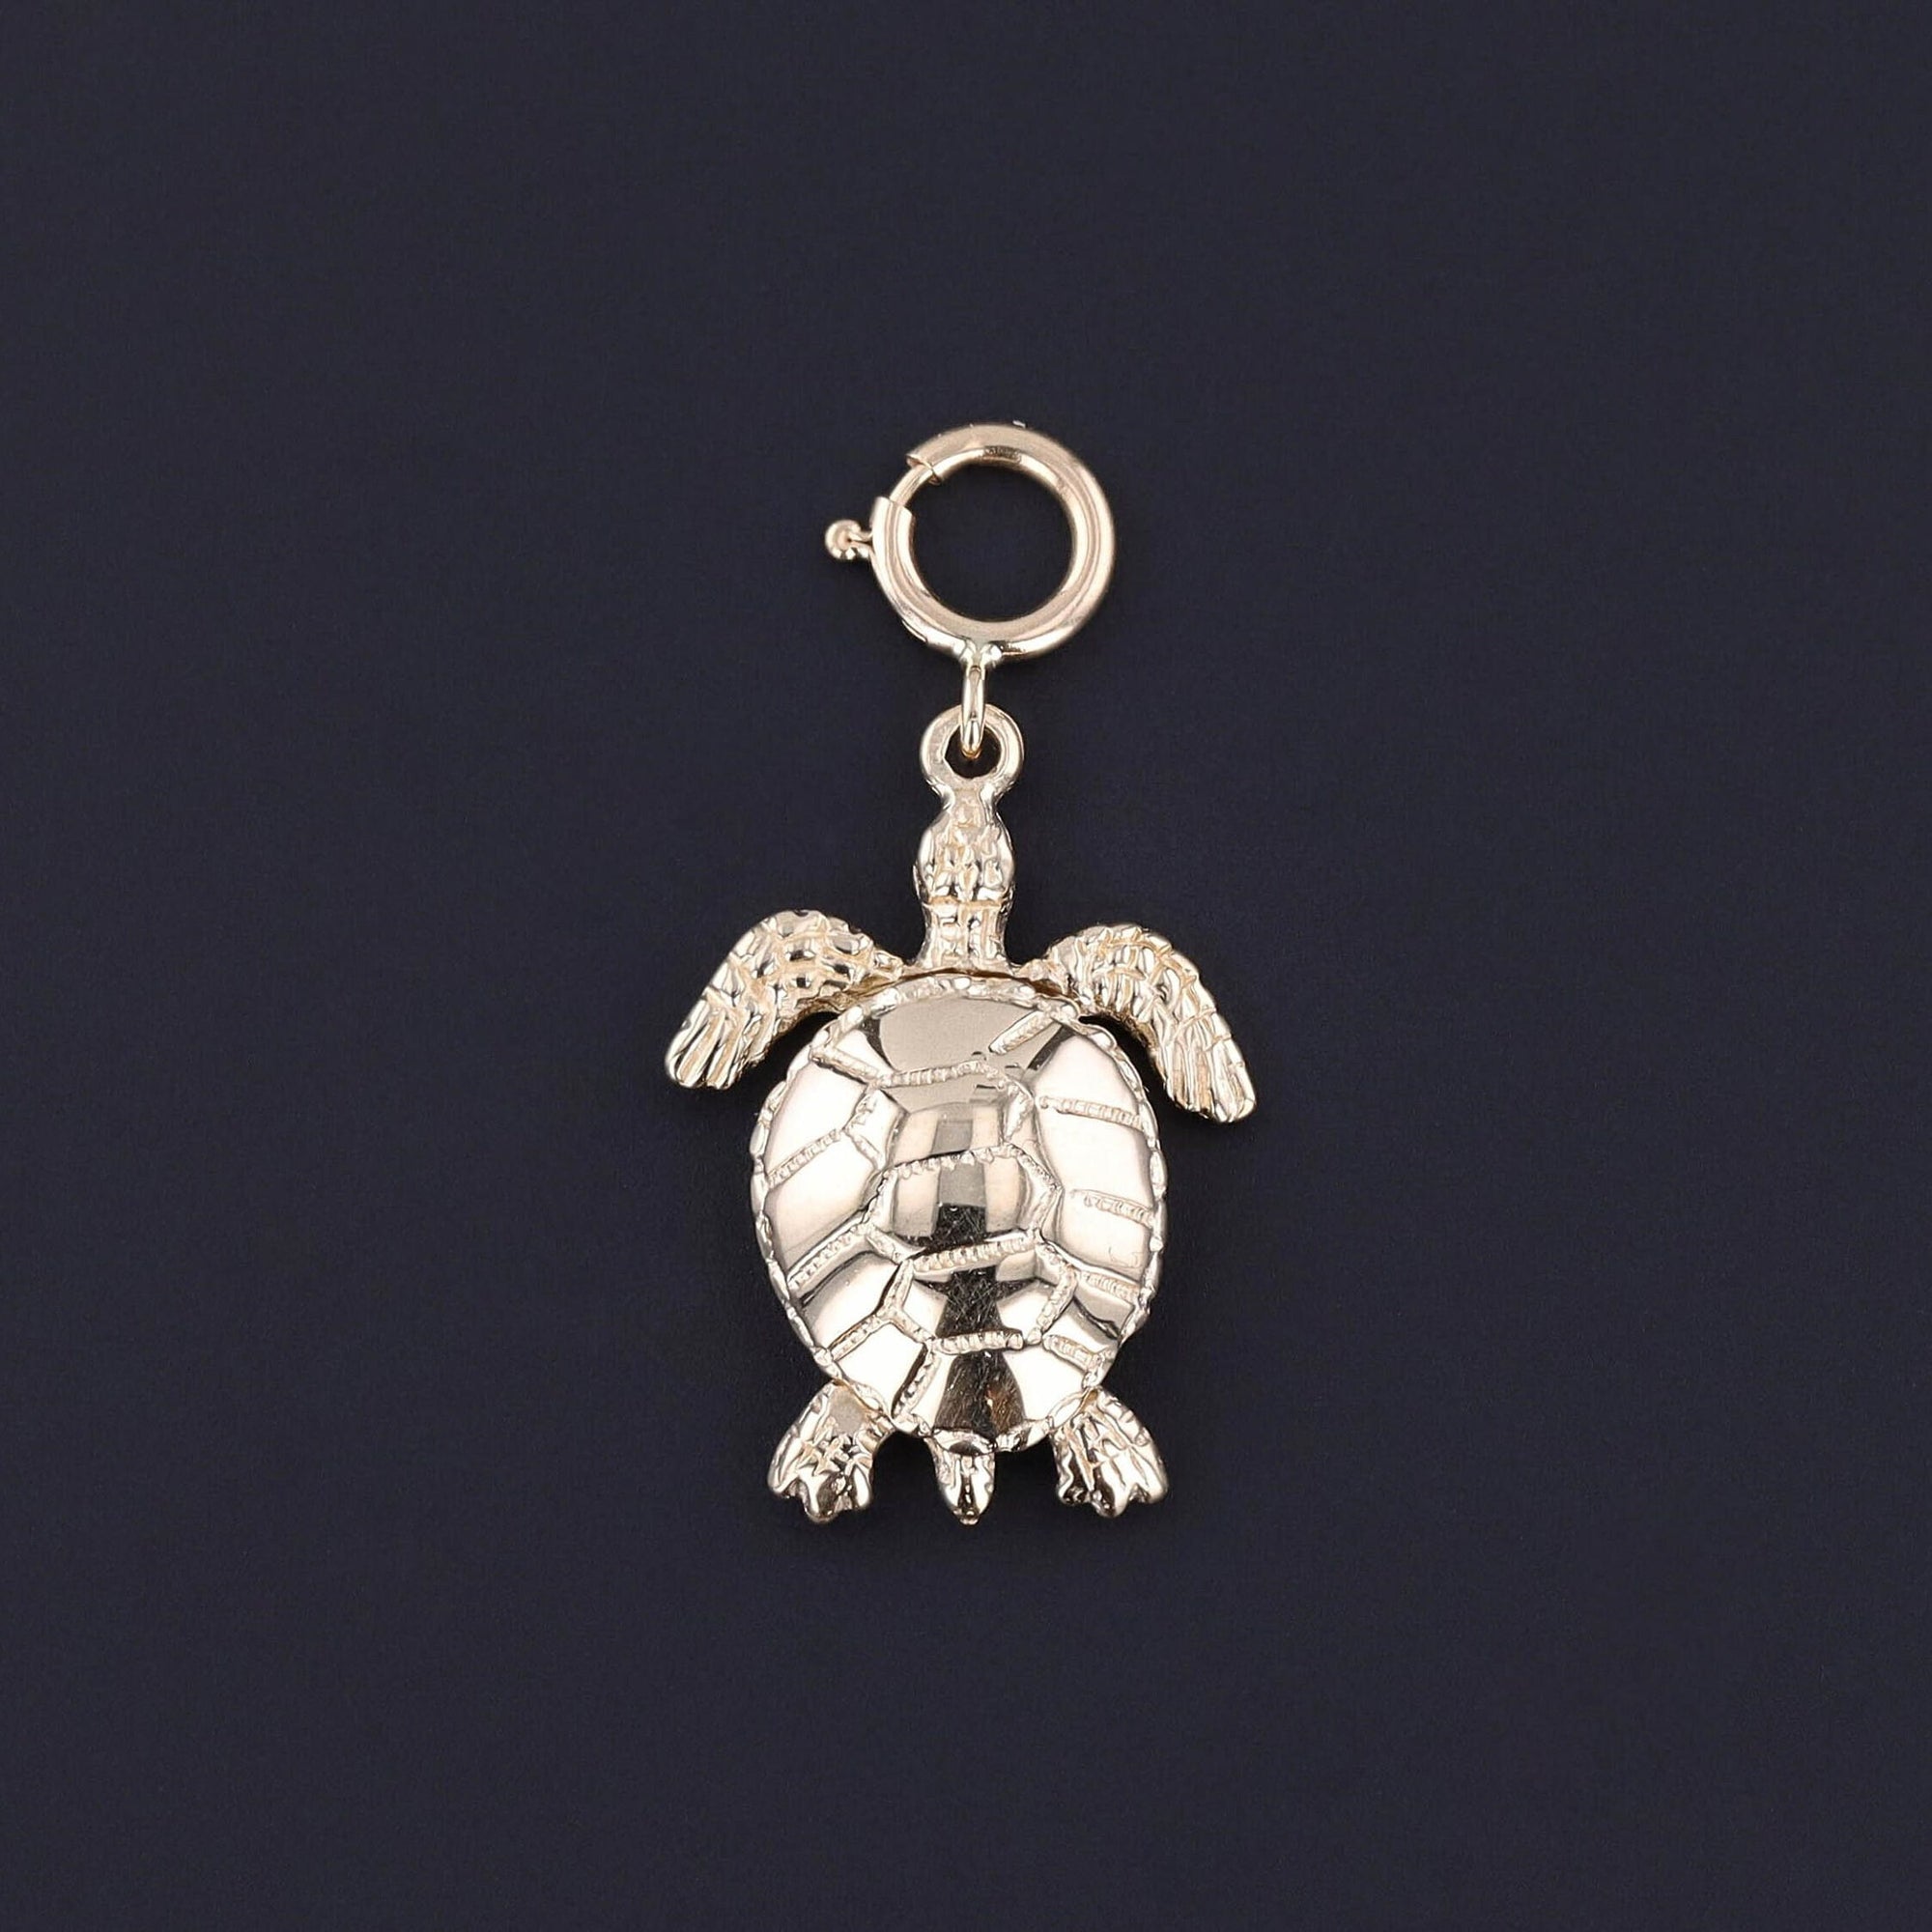 Vintage Moveable Sea Turtle Charm of 14k Gold